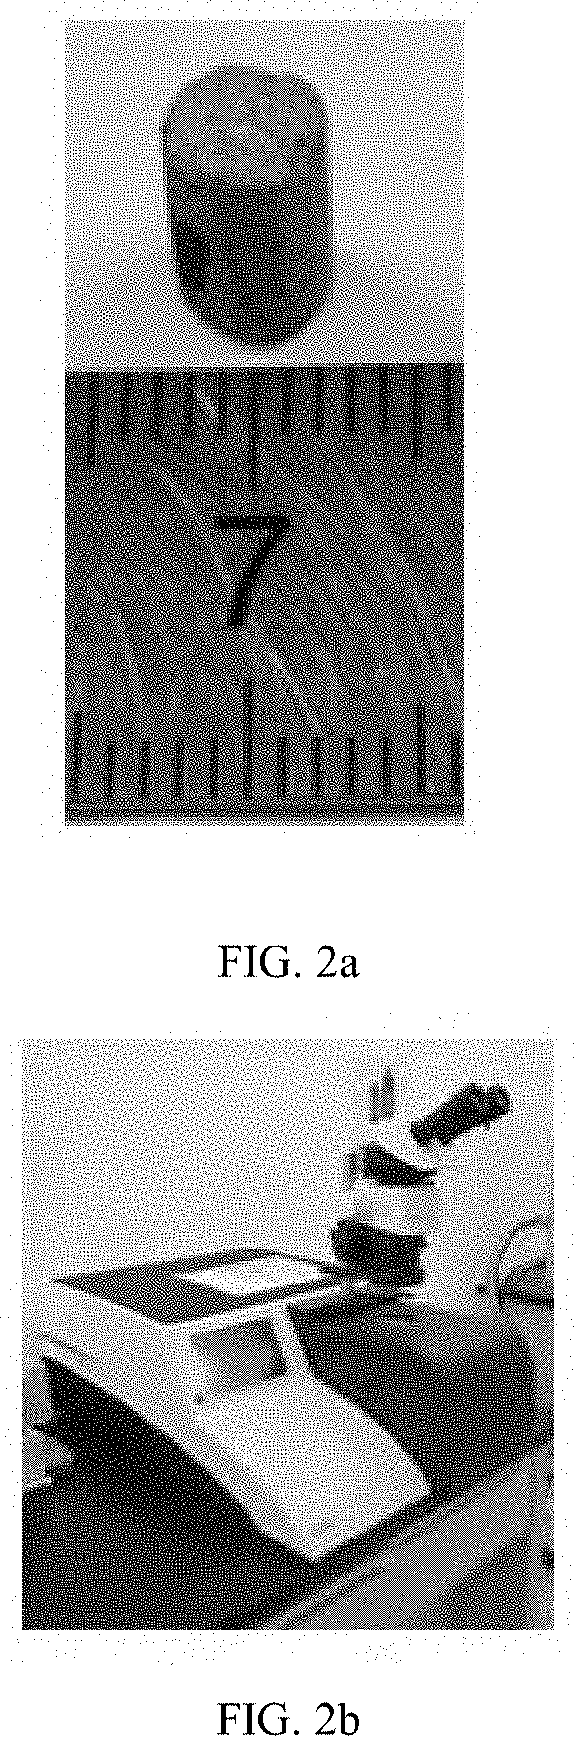 Method for measuring micro-scale strength and residual strength of brittle rock